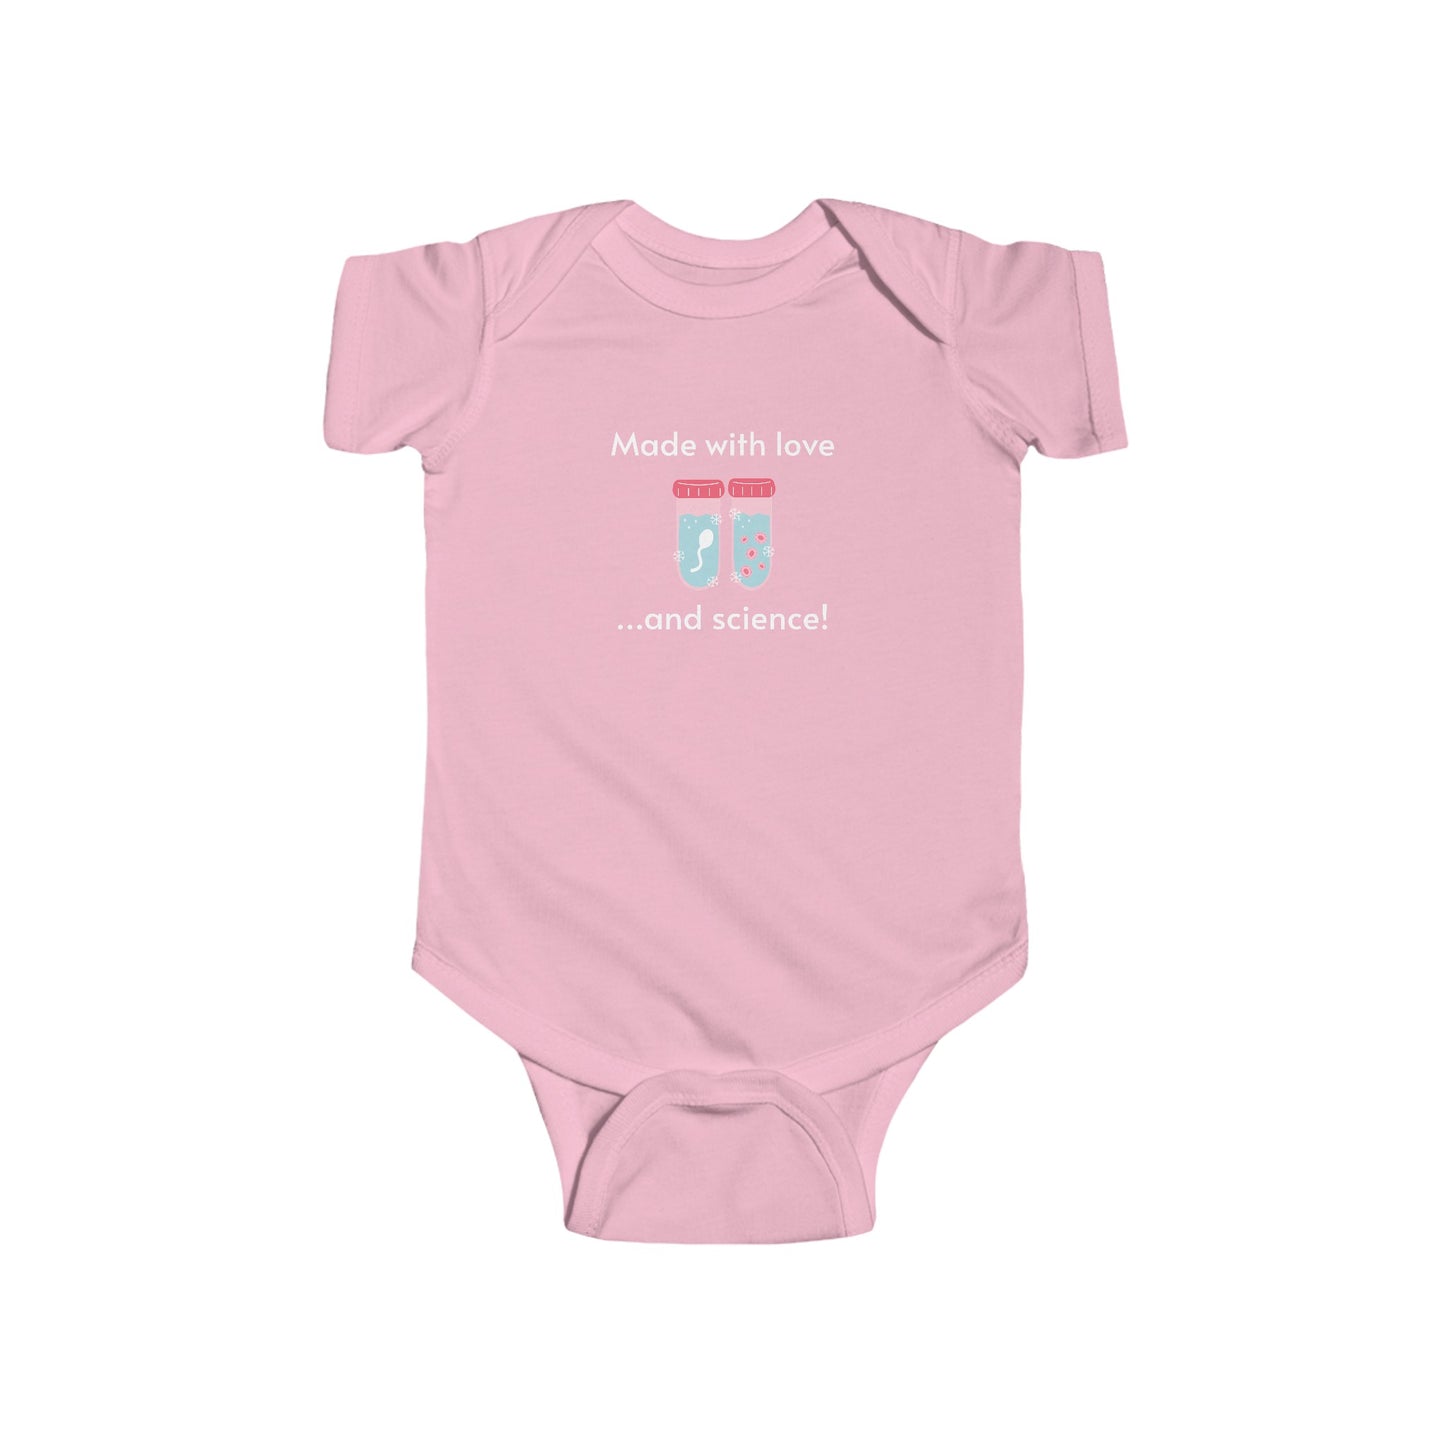 Made with love, and science! Baby Bodysuit